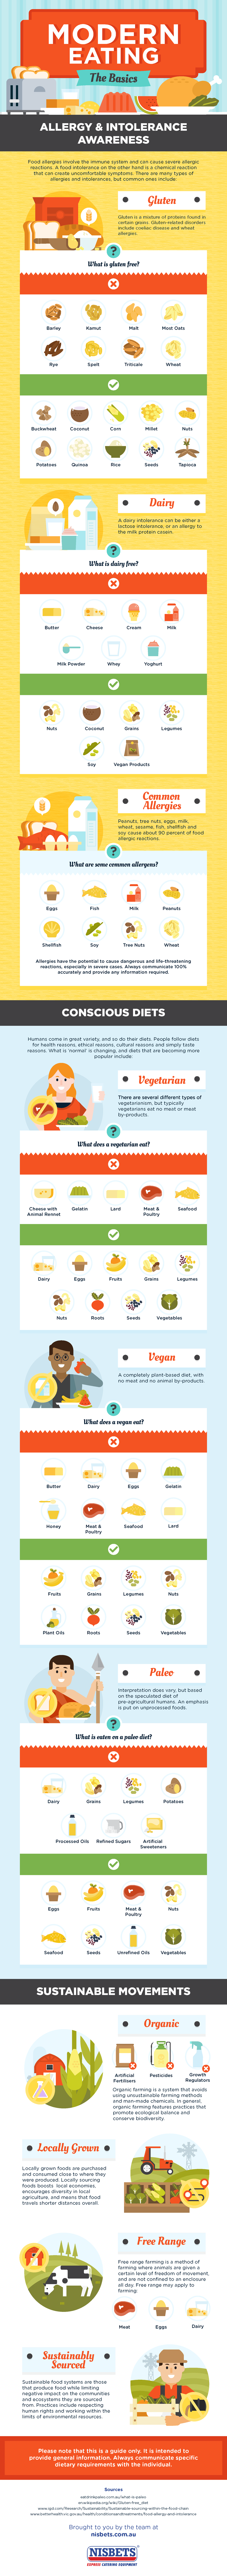 Guide to Modern Eating - infographic